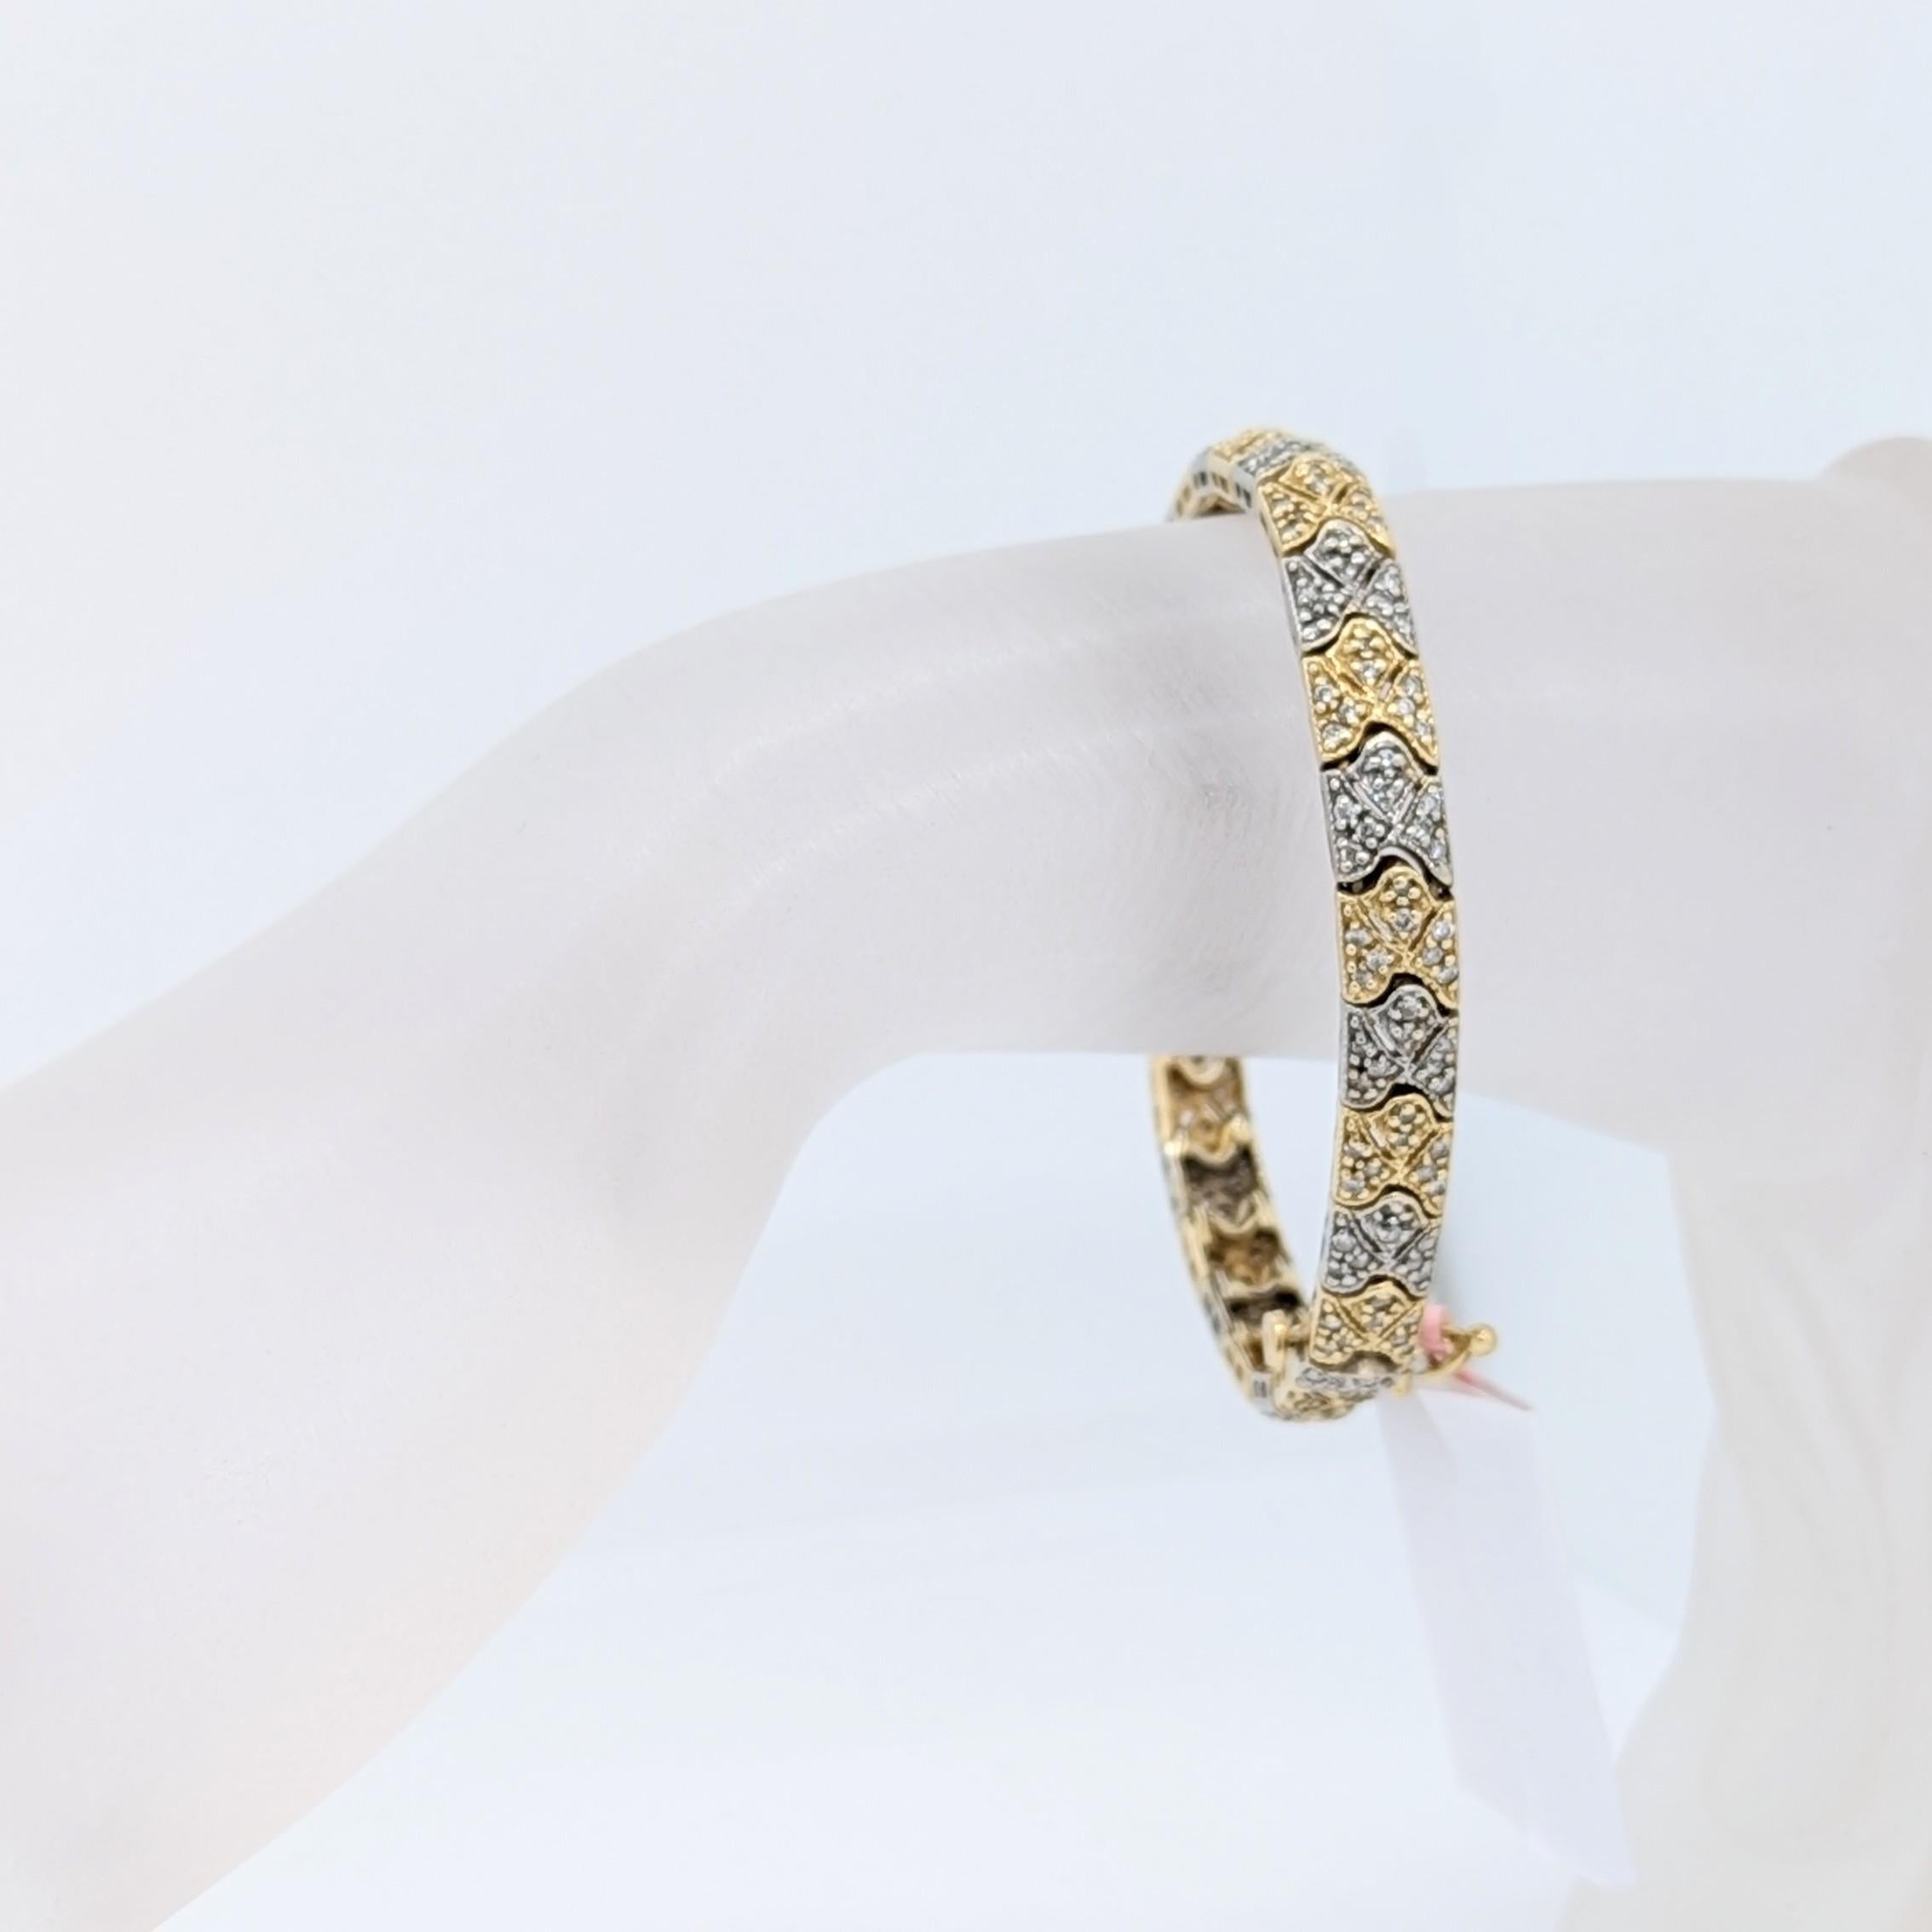 Beautiful good quality, white, and bright diamond rounds in this elegantly designed bracelet.  Handmade in 14k yellow and white gold.  Length is 7